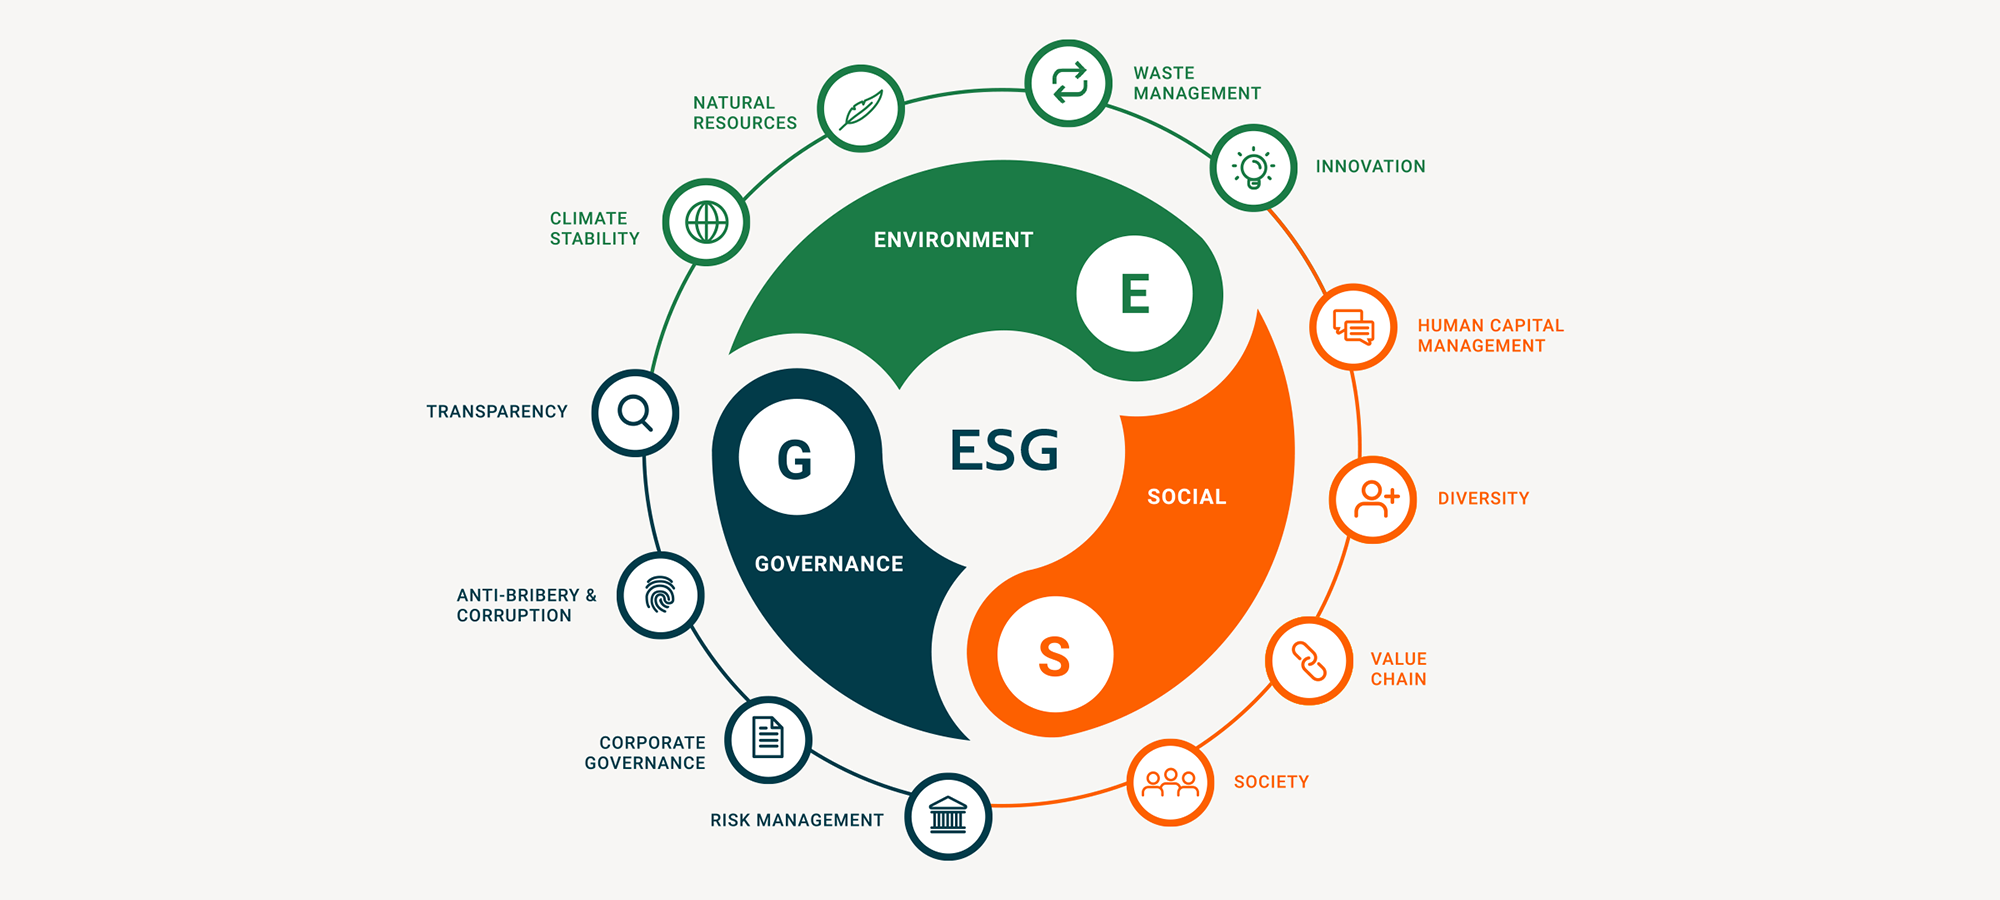 ESG analysis and reporting